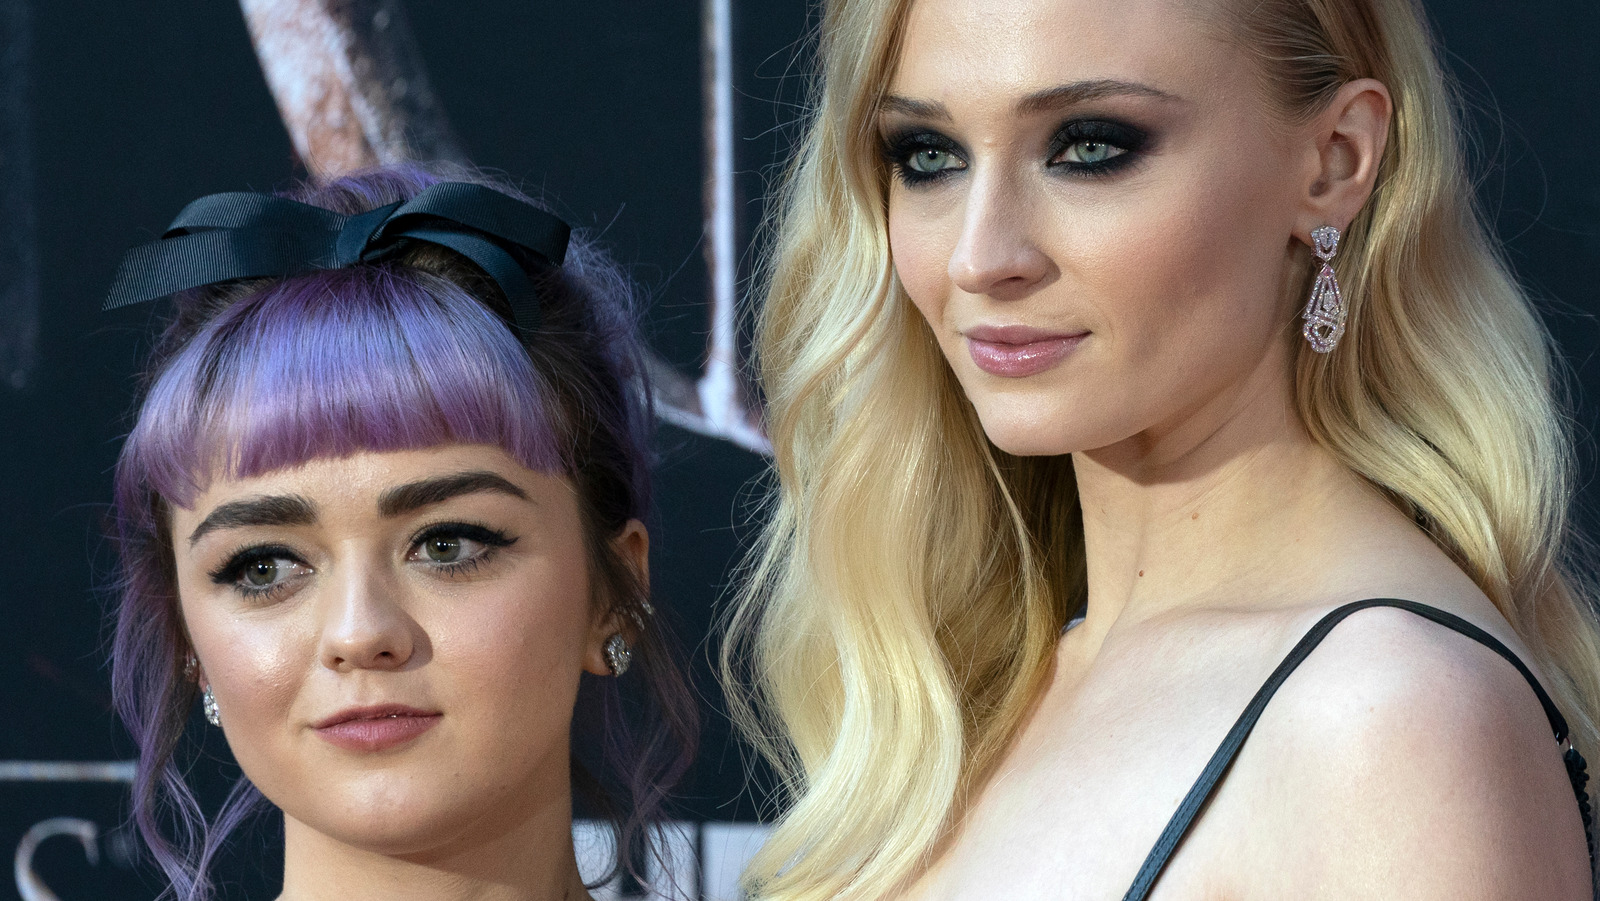 The True Story Behind Maisie Williams And Sophie Turner’s Matching Tattoos